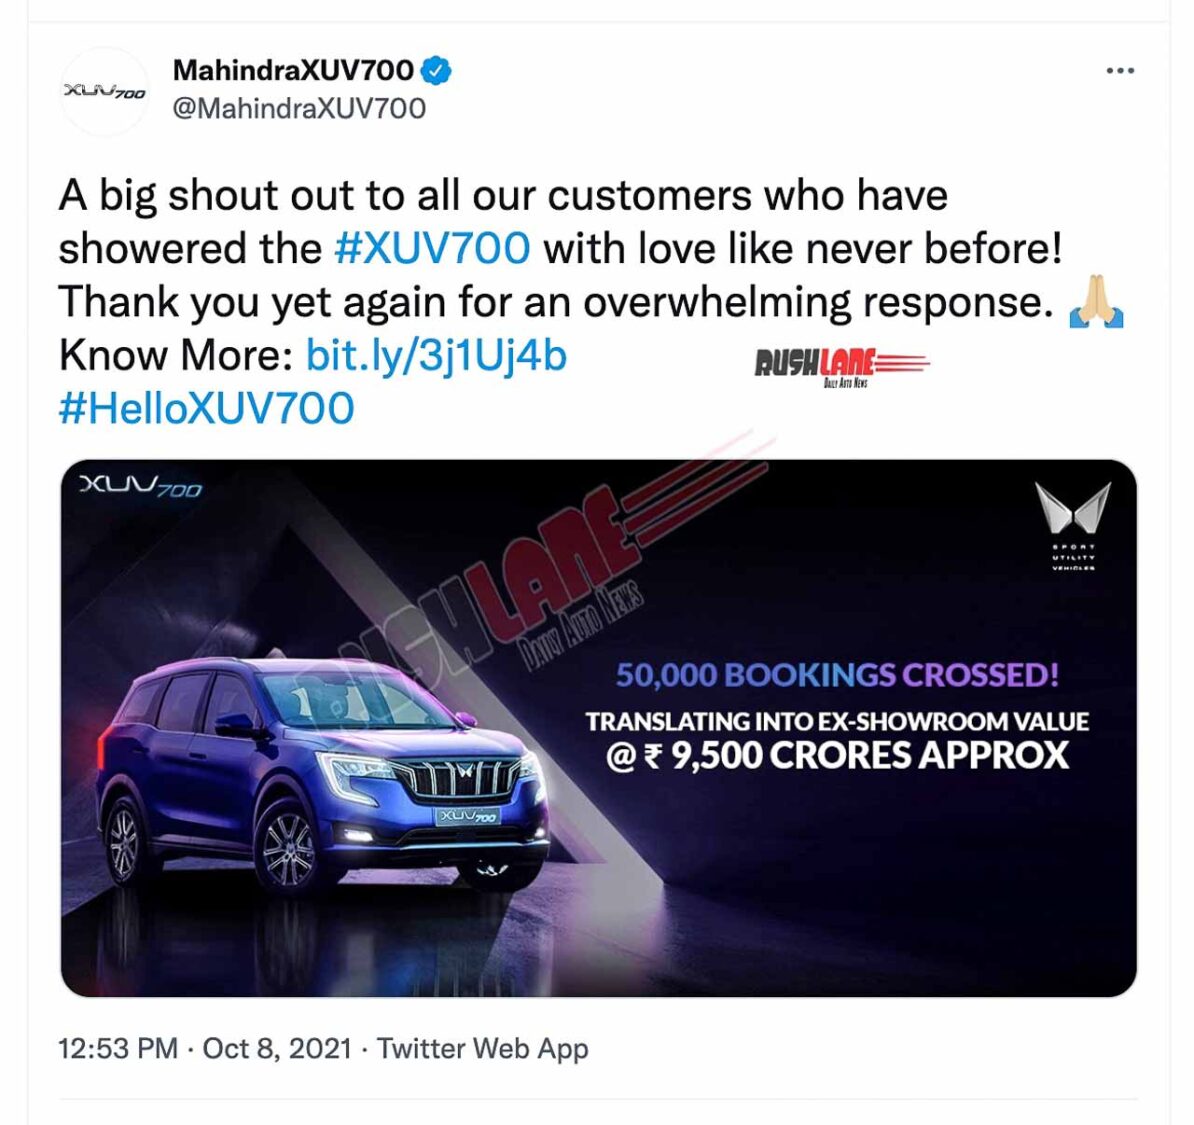 Mahindra sold Rs 9,500 crores worth of XUV700 in 3 hours